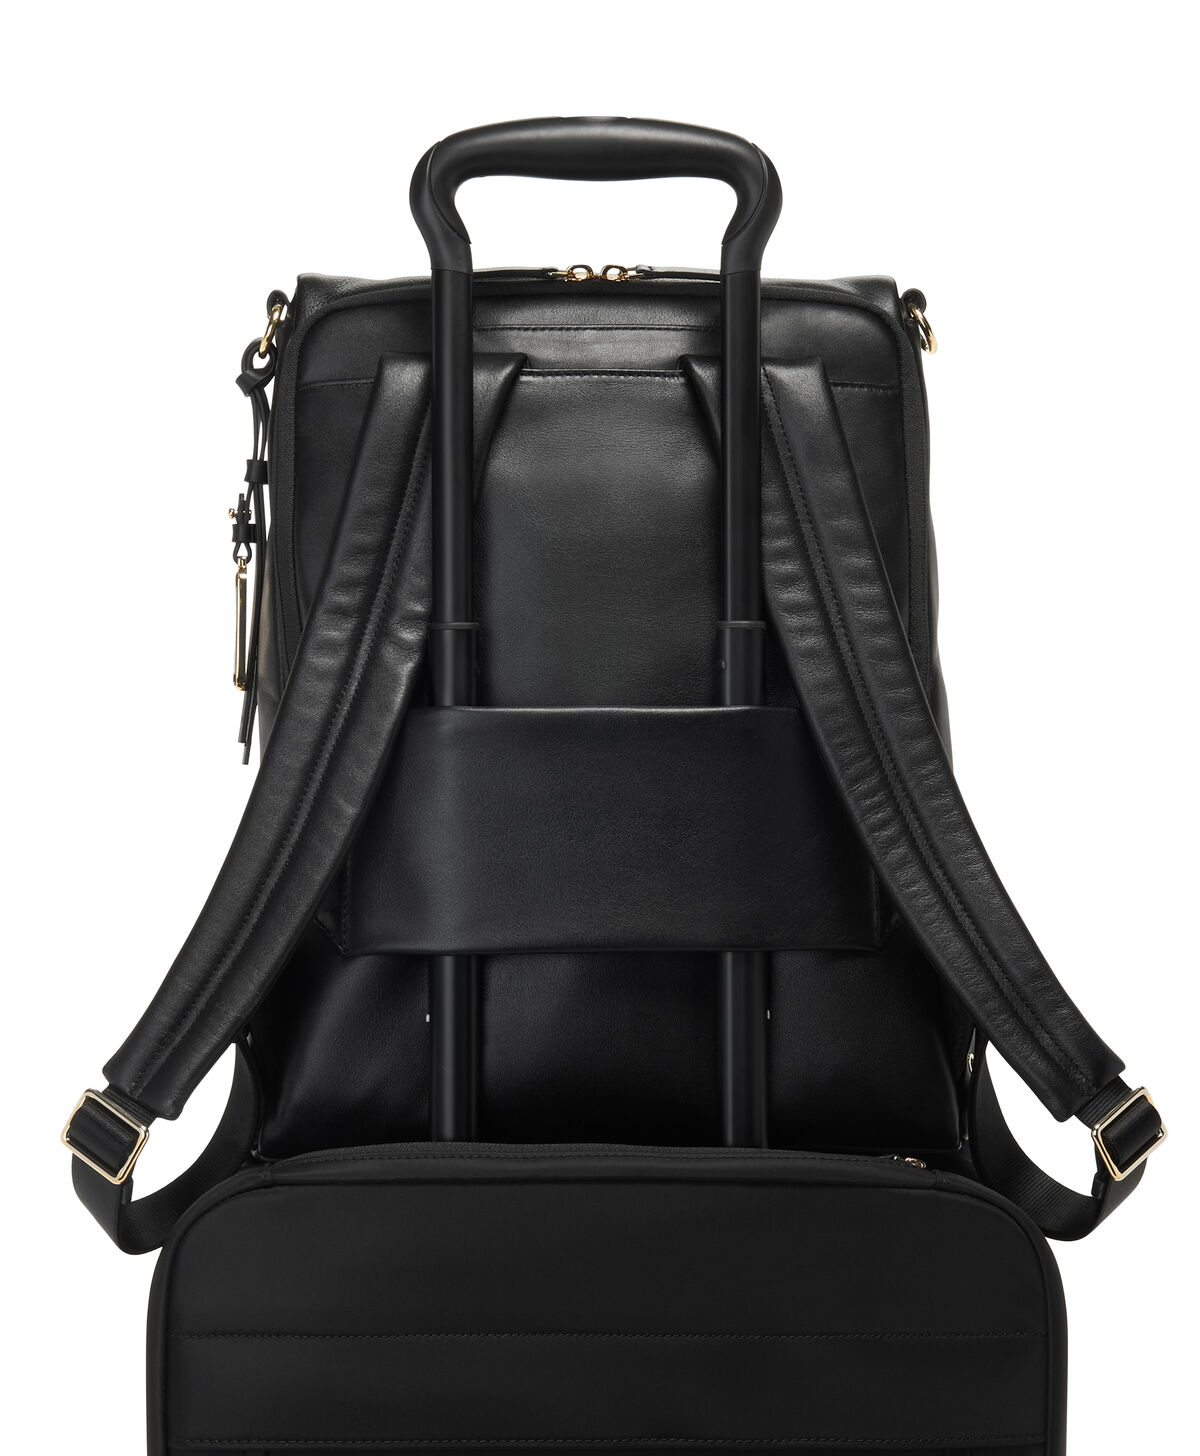 Black+Tumi+T-tech+Laptop+Bag+Backpack+Straps+Essential+Gear+Convertible+Travel  for sale online